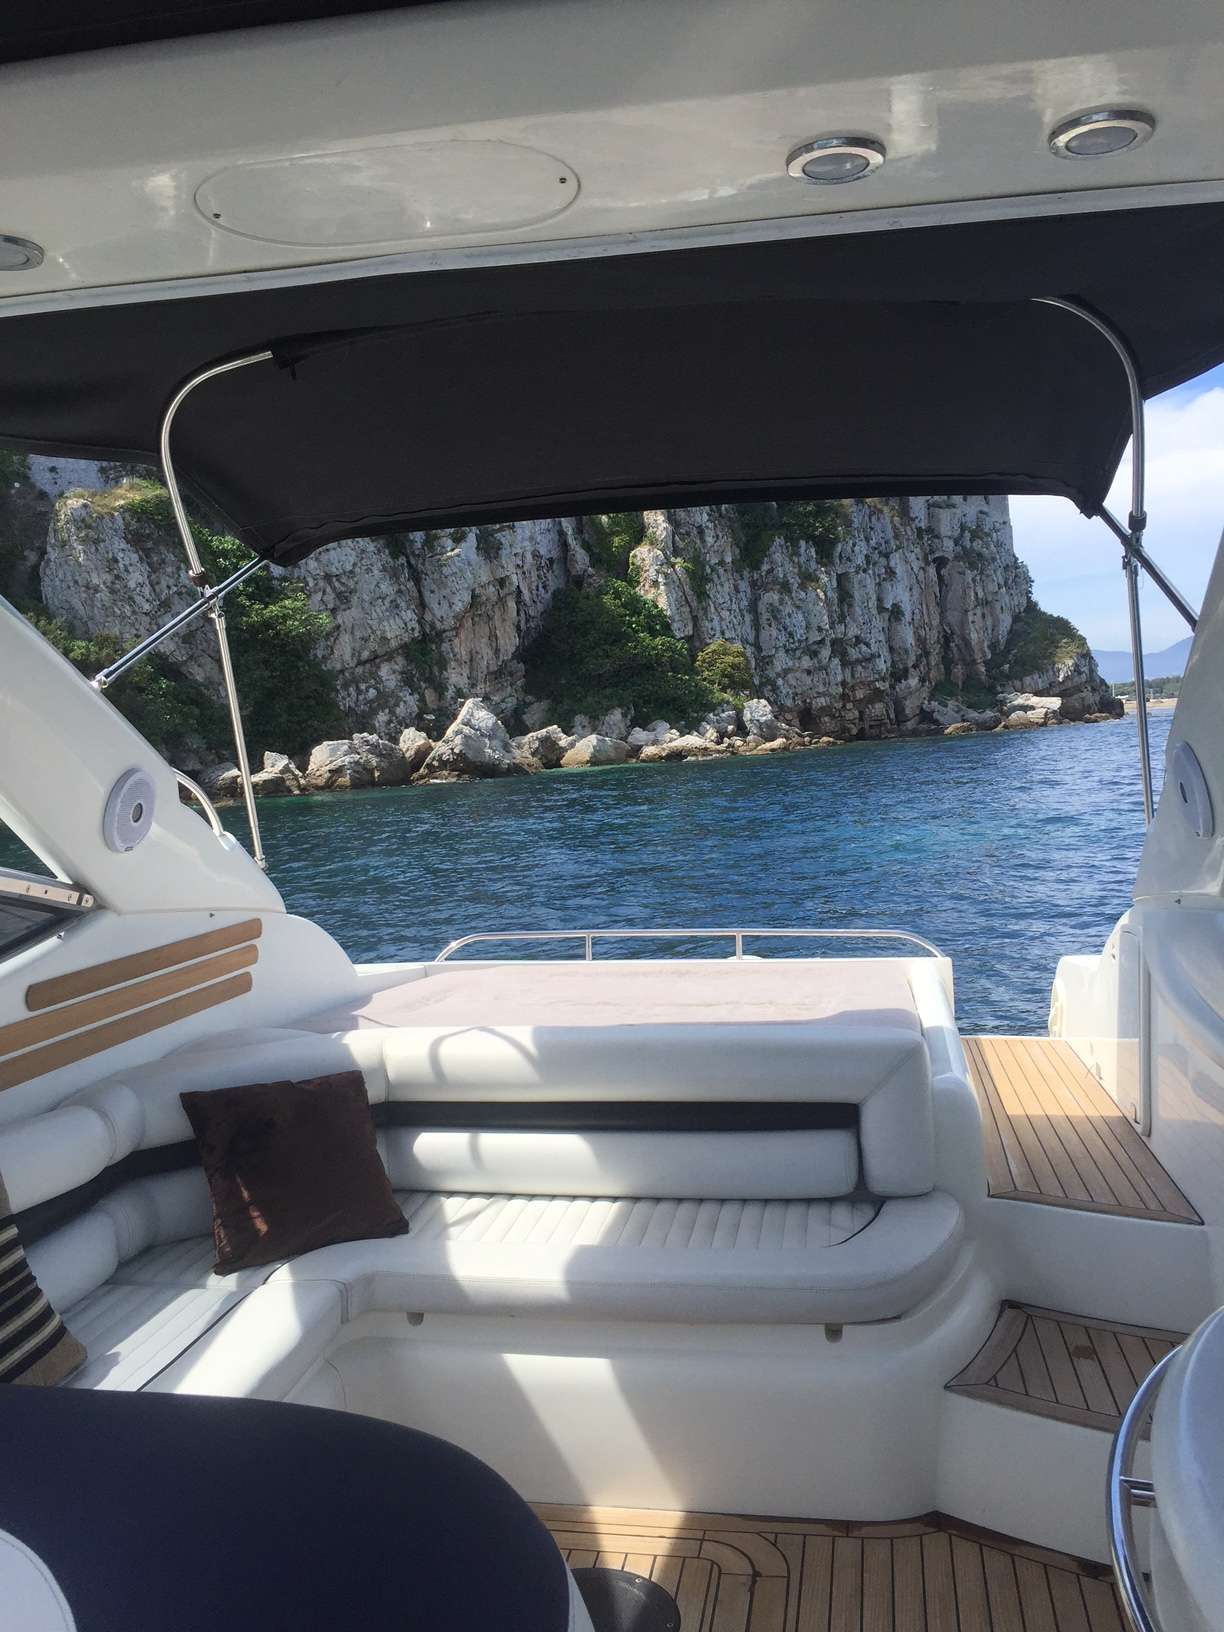 Sunseeker 48 - Luxury yacht charter France & Boat hire in France French Riviera Cannes Vieux port de Vallauris 5